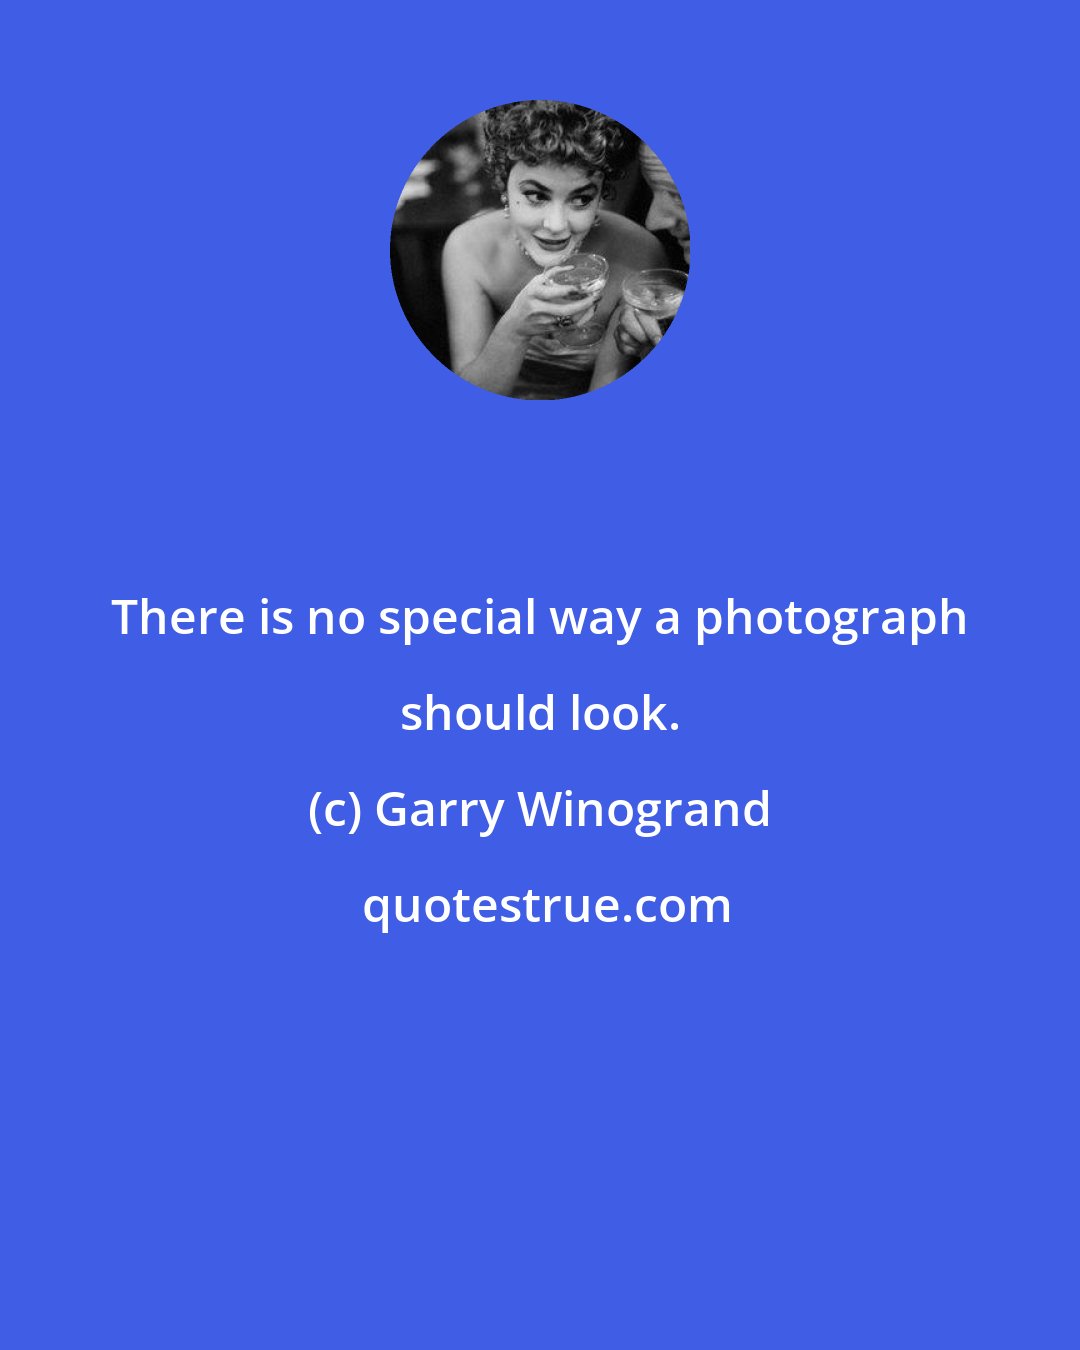 Garry Winogrand: There is no special way a photograph should look.